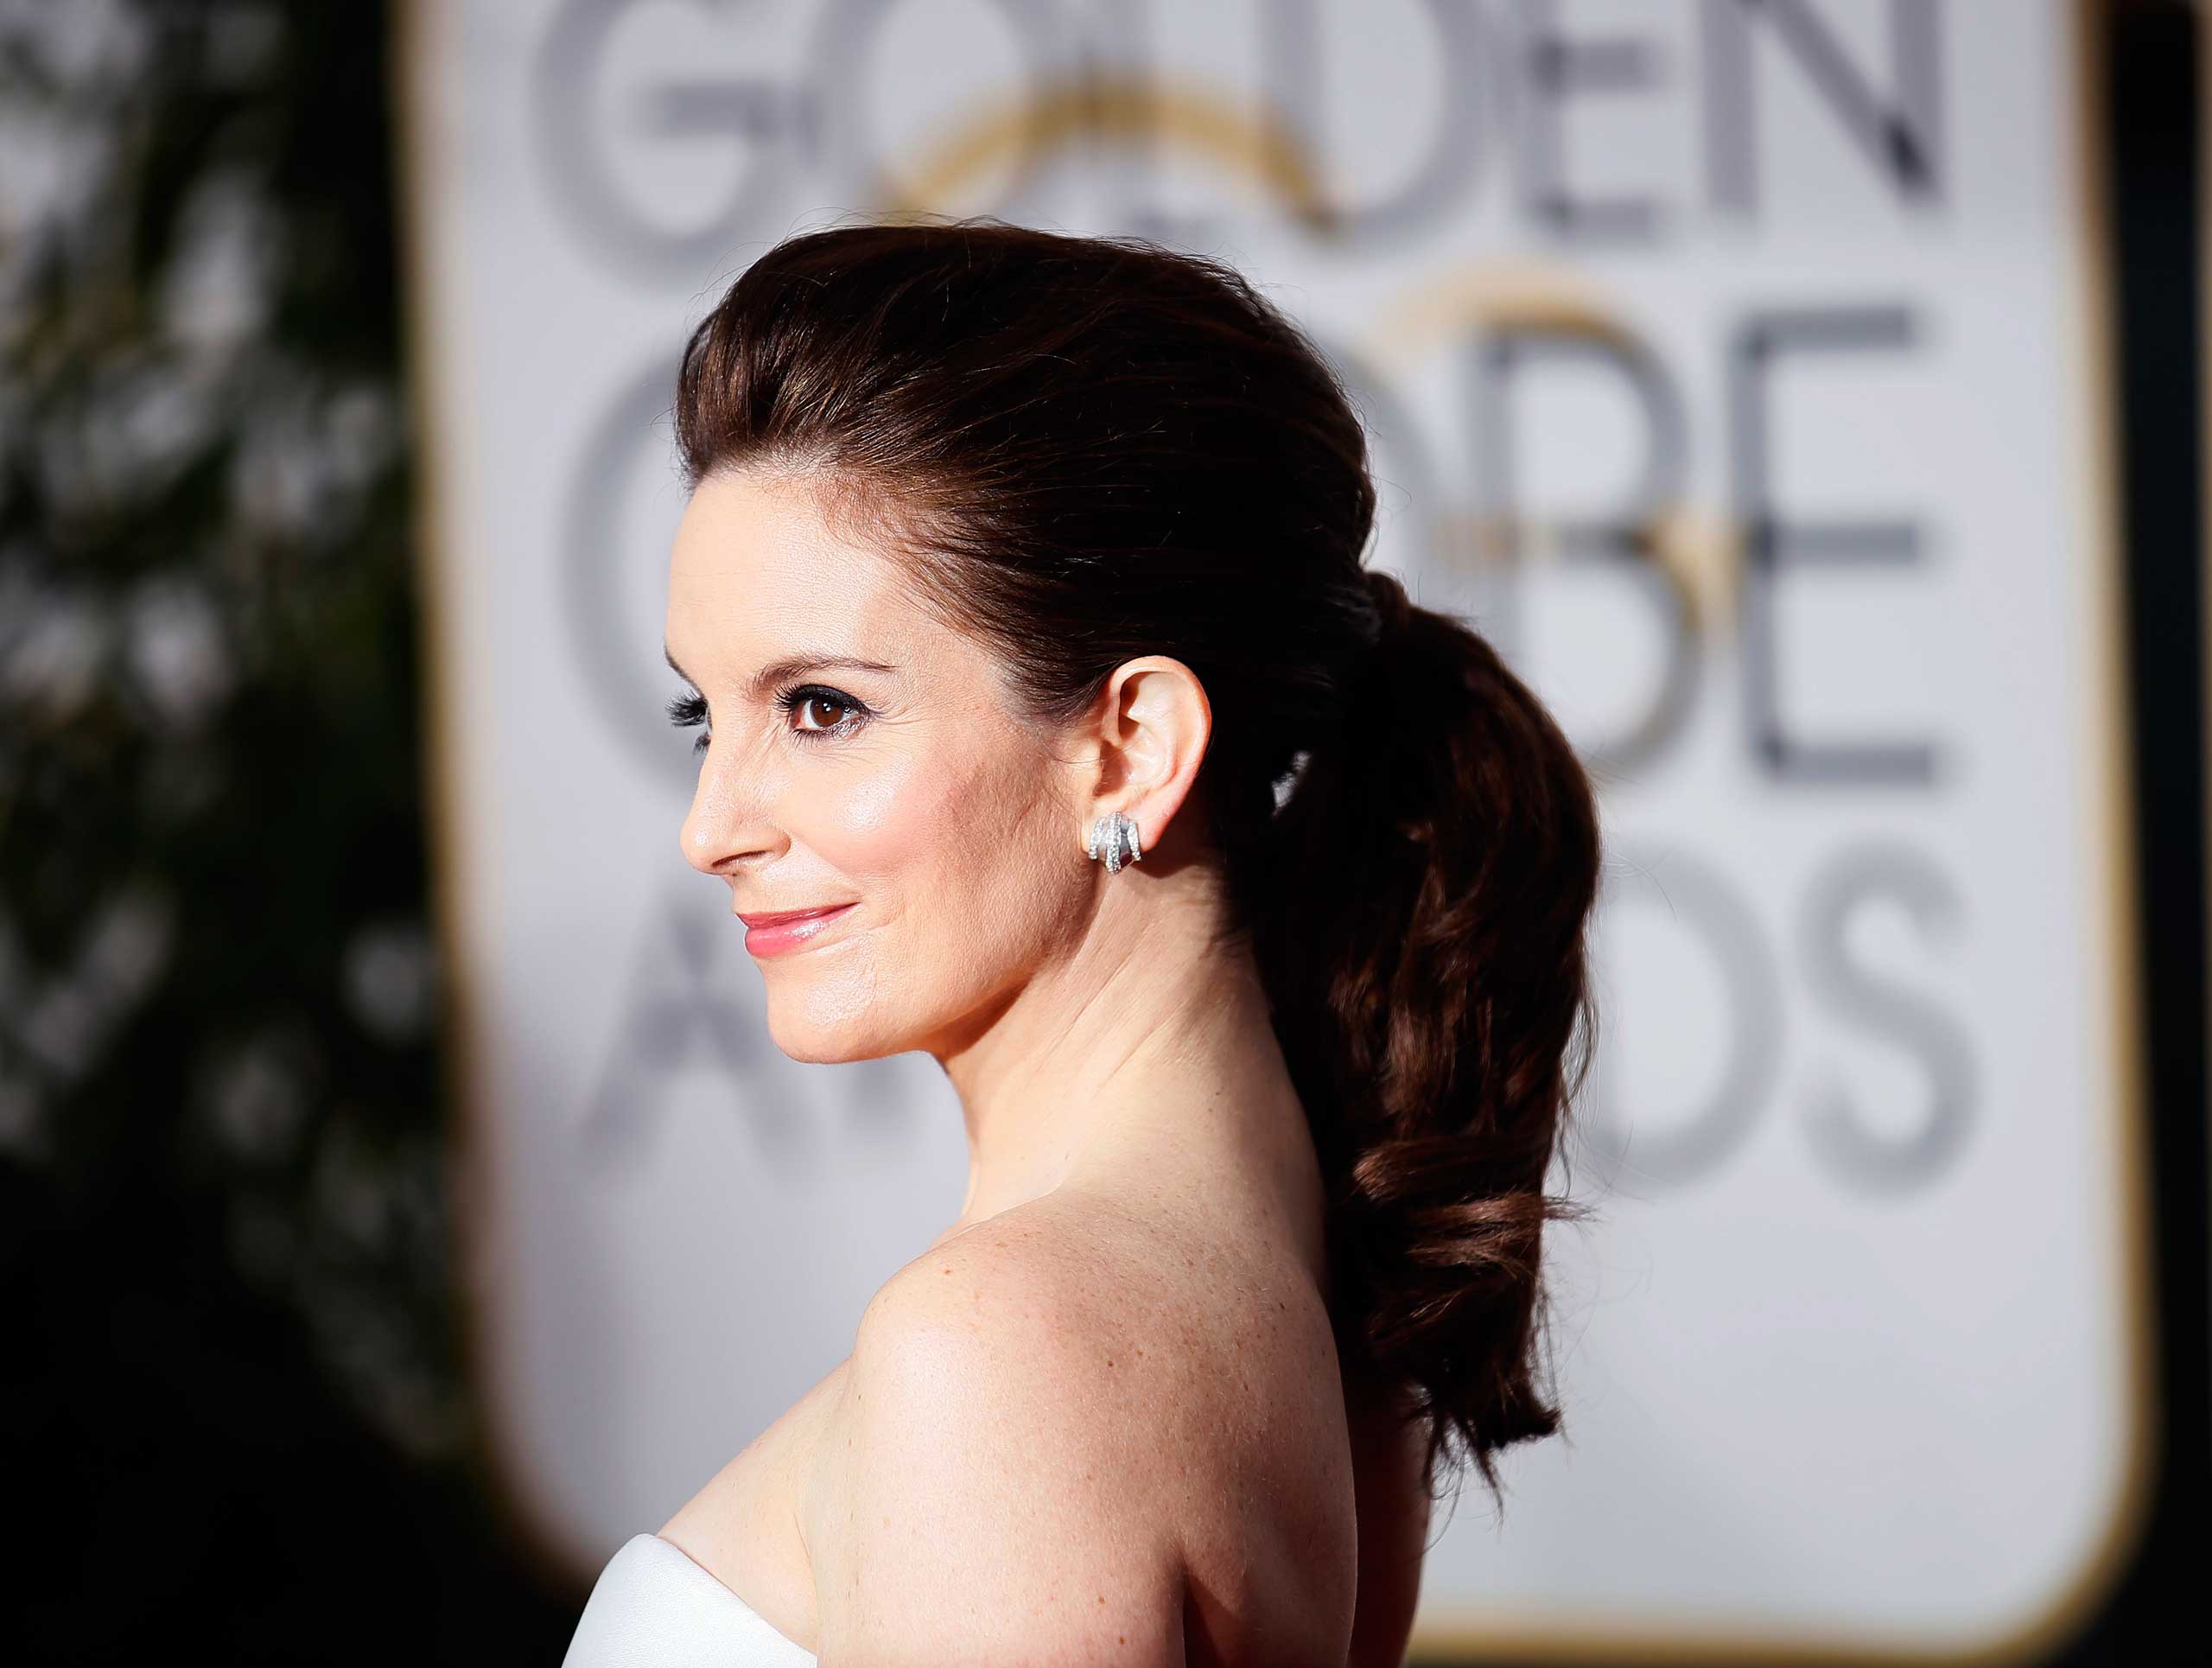 Tina Fey arrives at the 72nd Golden Globe Awards in Beverly Hills, California, Jan. 11, 2015. (Danny Moloshok—Reuters)